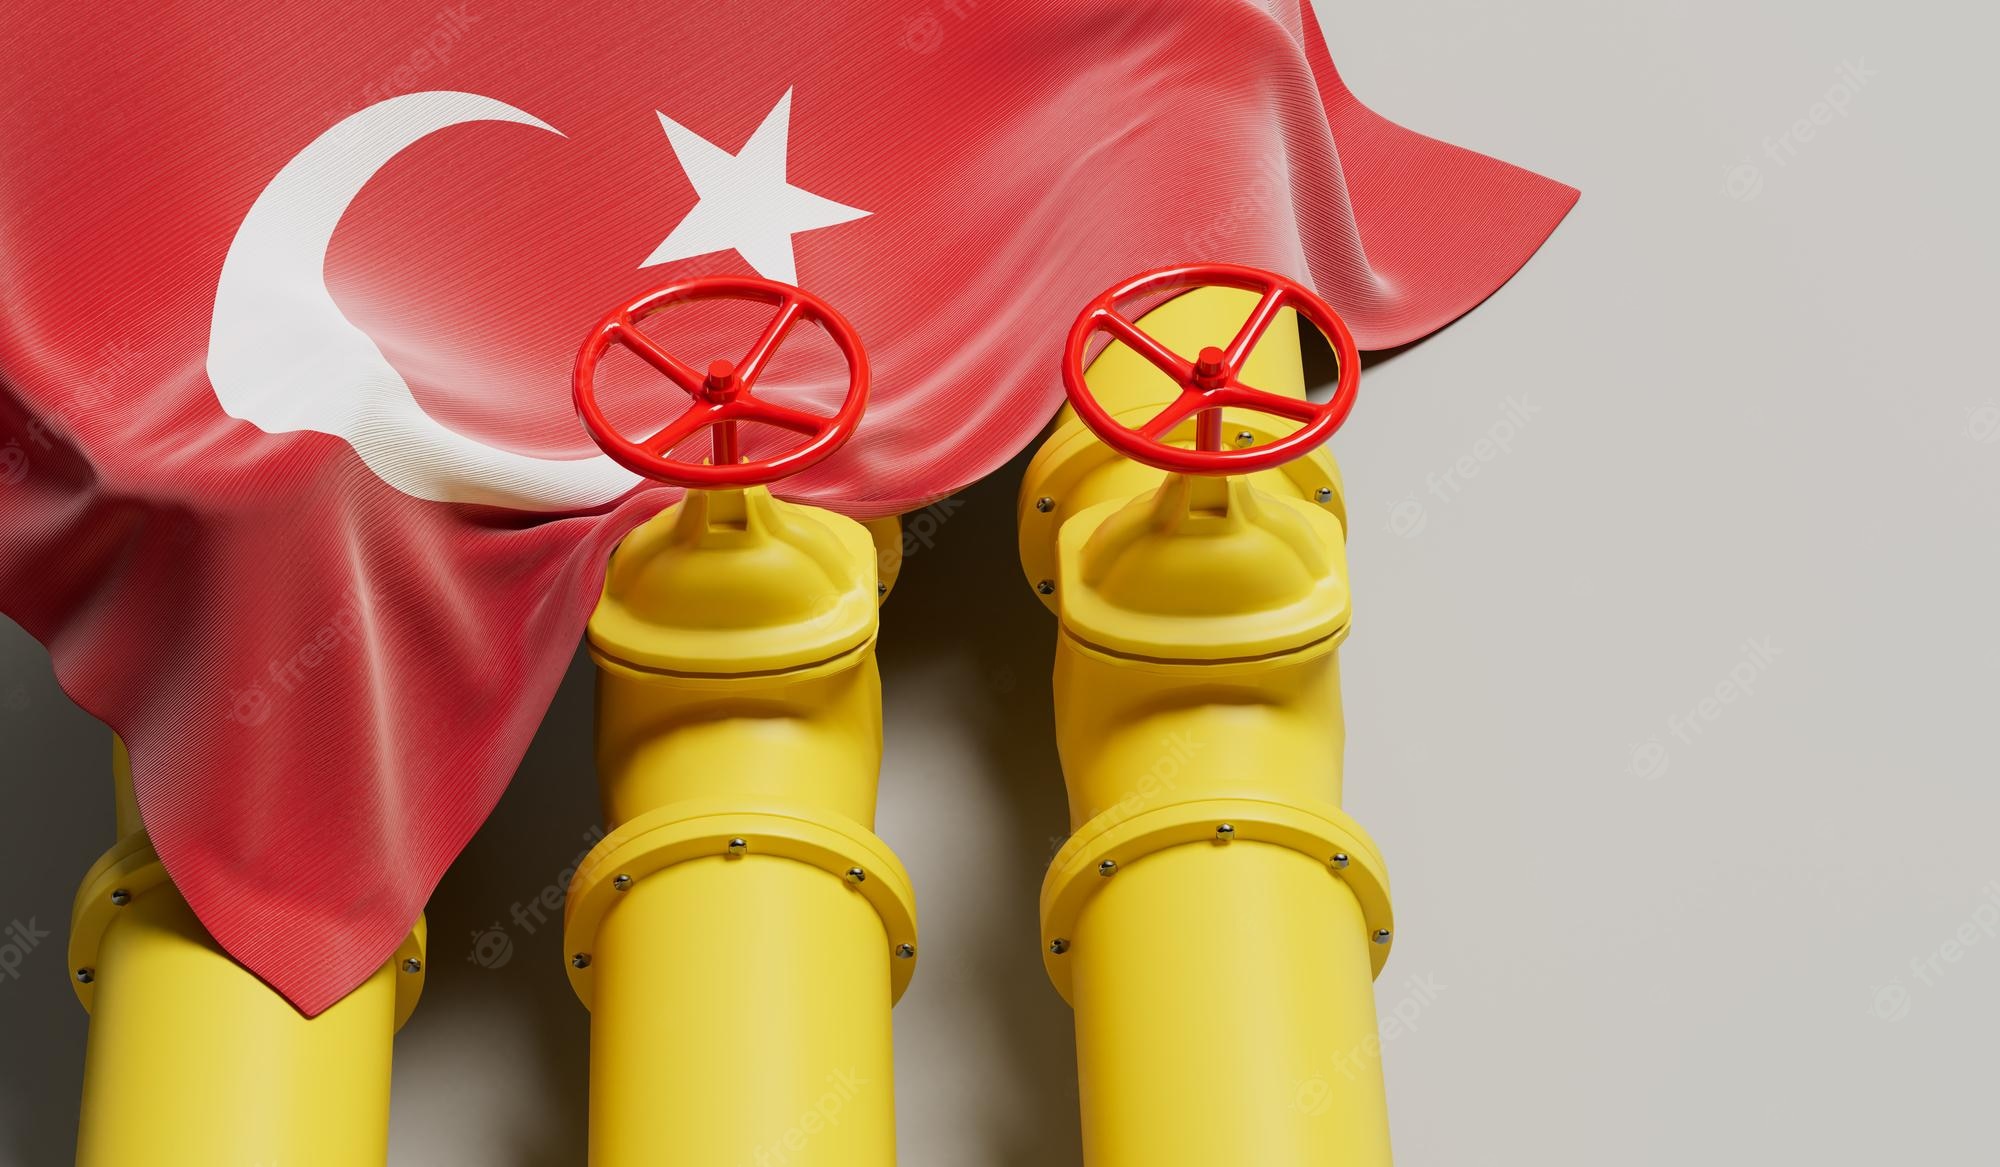 turkey-flag-covering-oil-gas-fuel-pipe-line-oil-industry-concept-3d-rendering_601748-43437